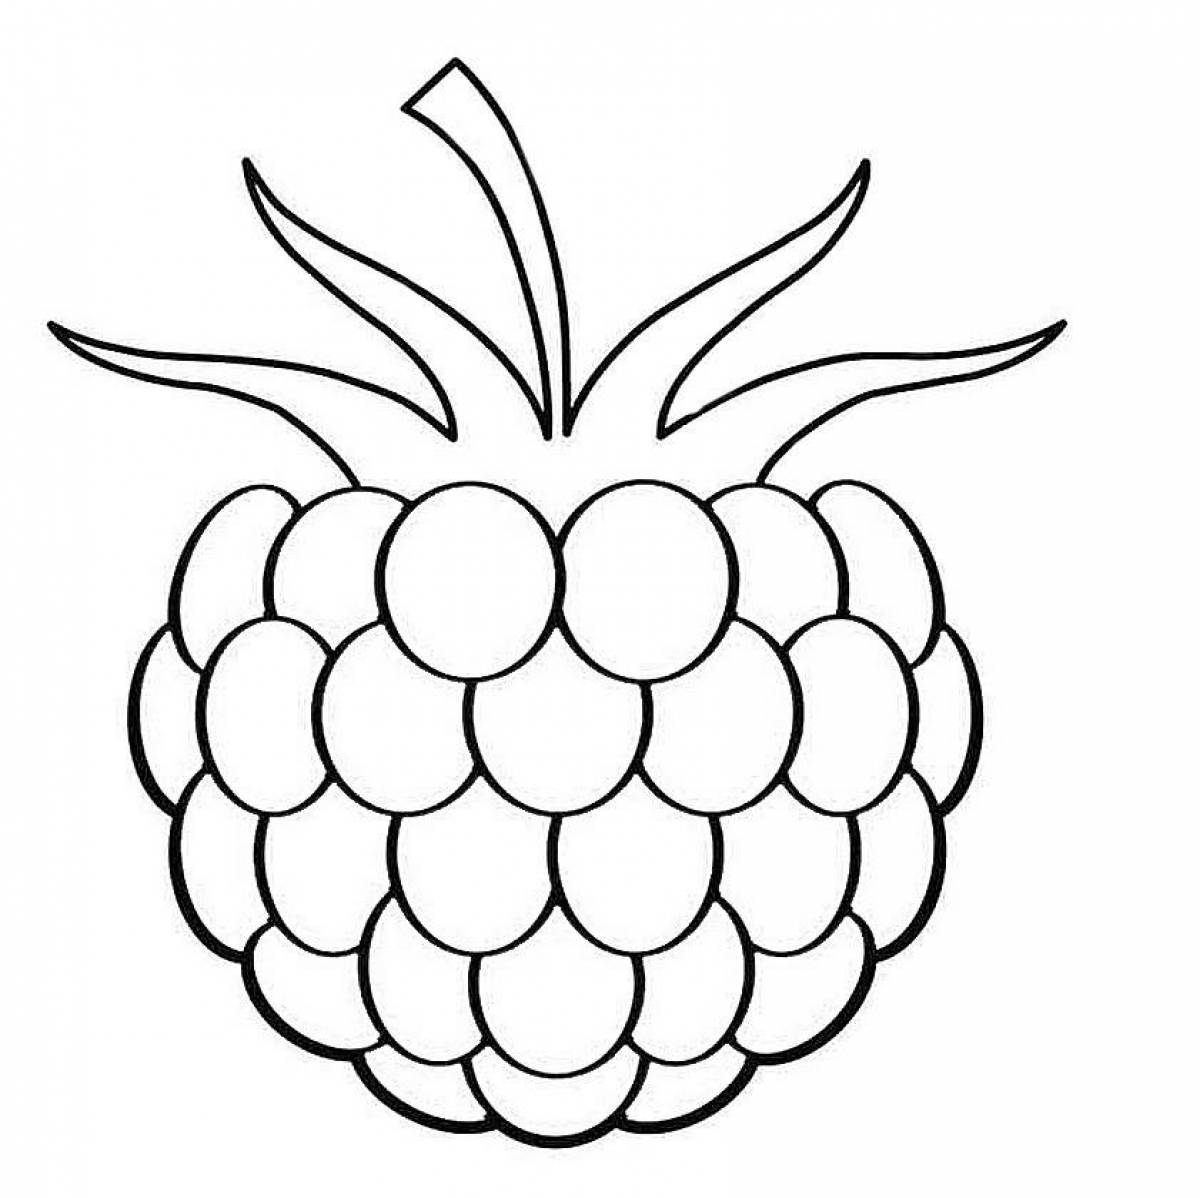 Wonderful fruits and vegetables coloring pages for kids